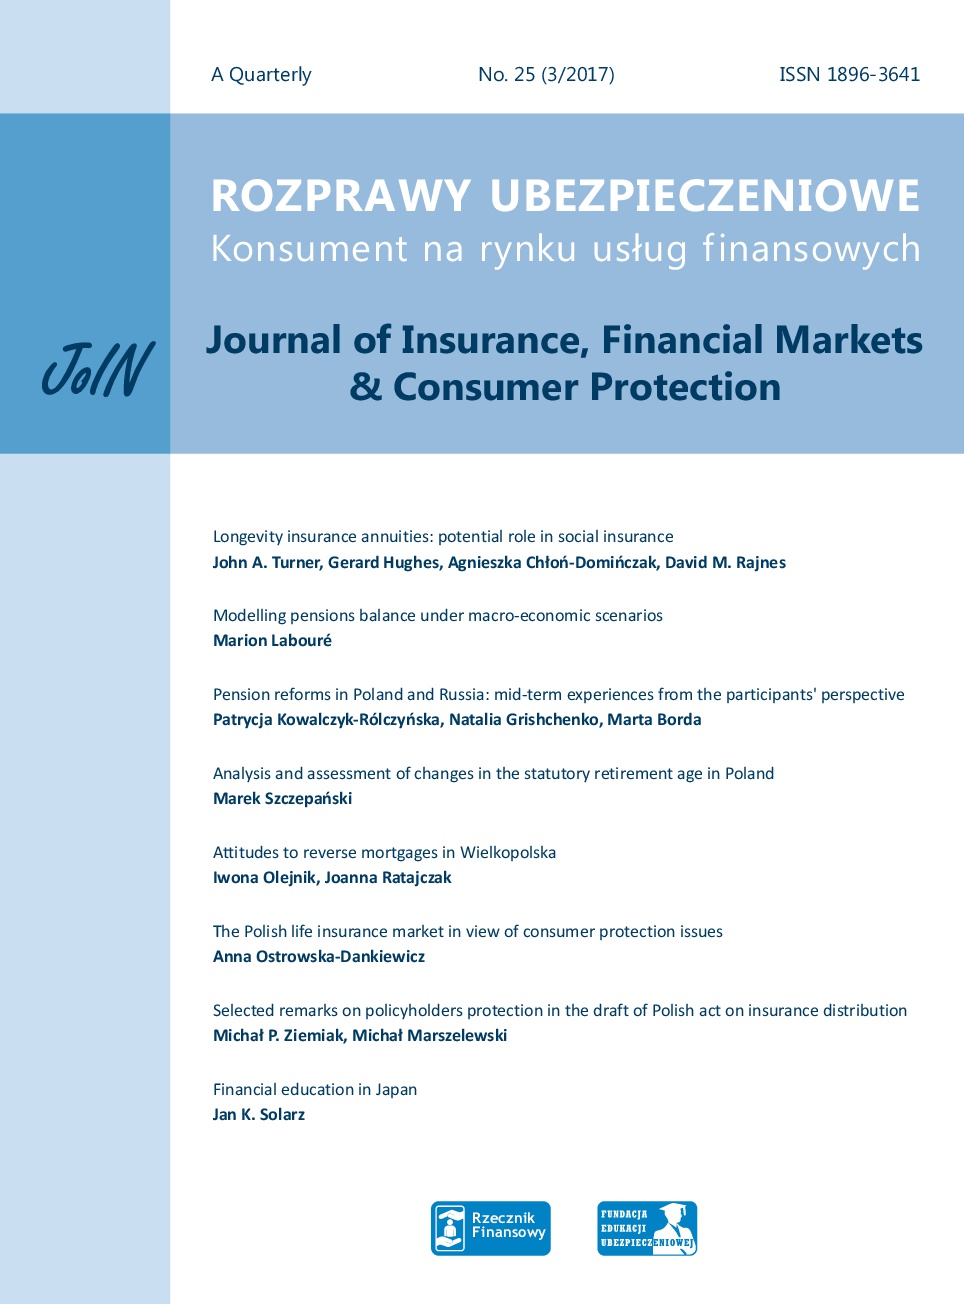 Pension reforms in Poland and Russia: mid-term experiences from the participants’ perspective Cover Image